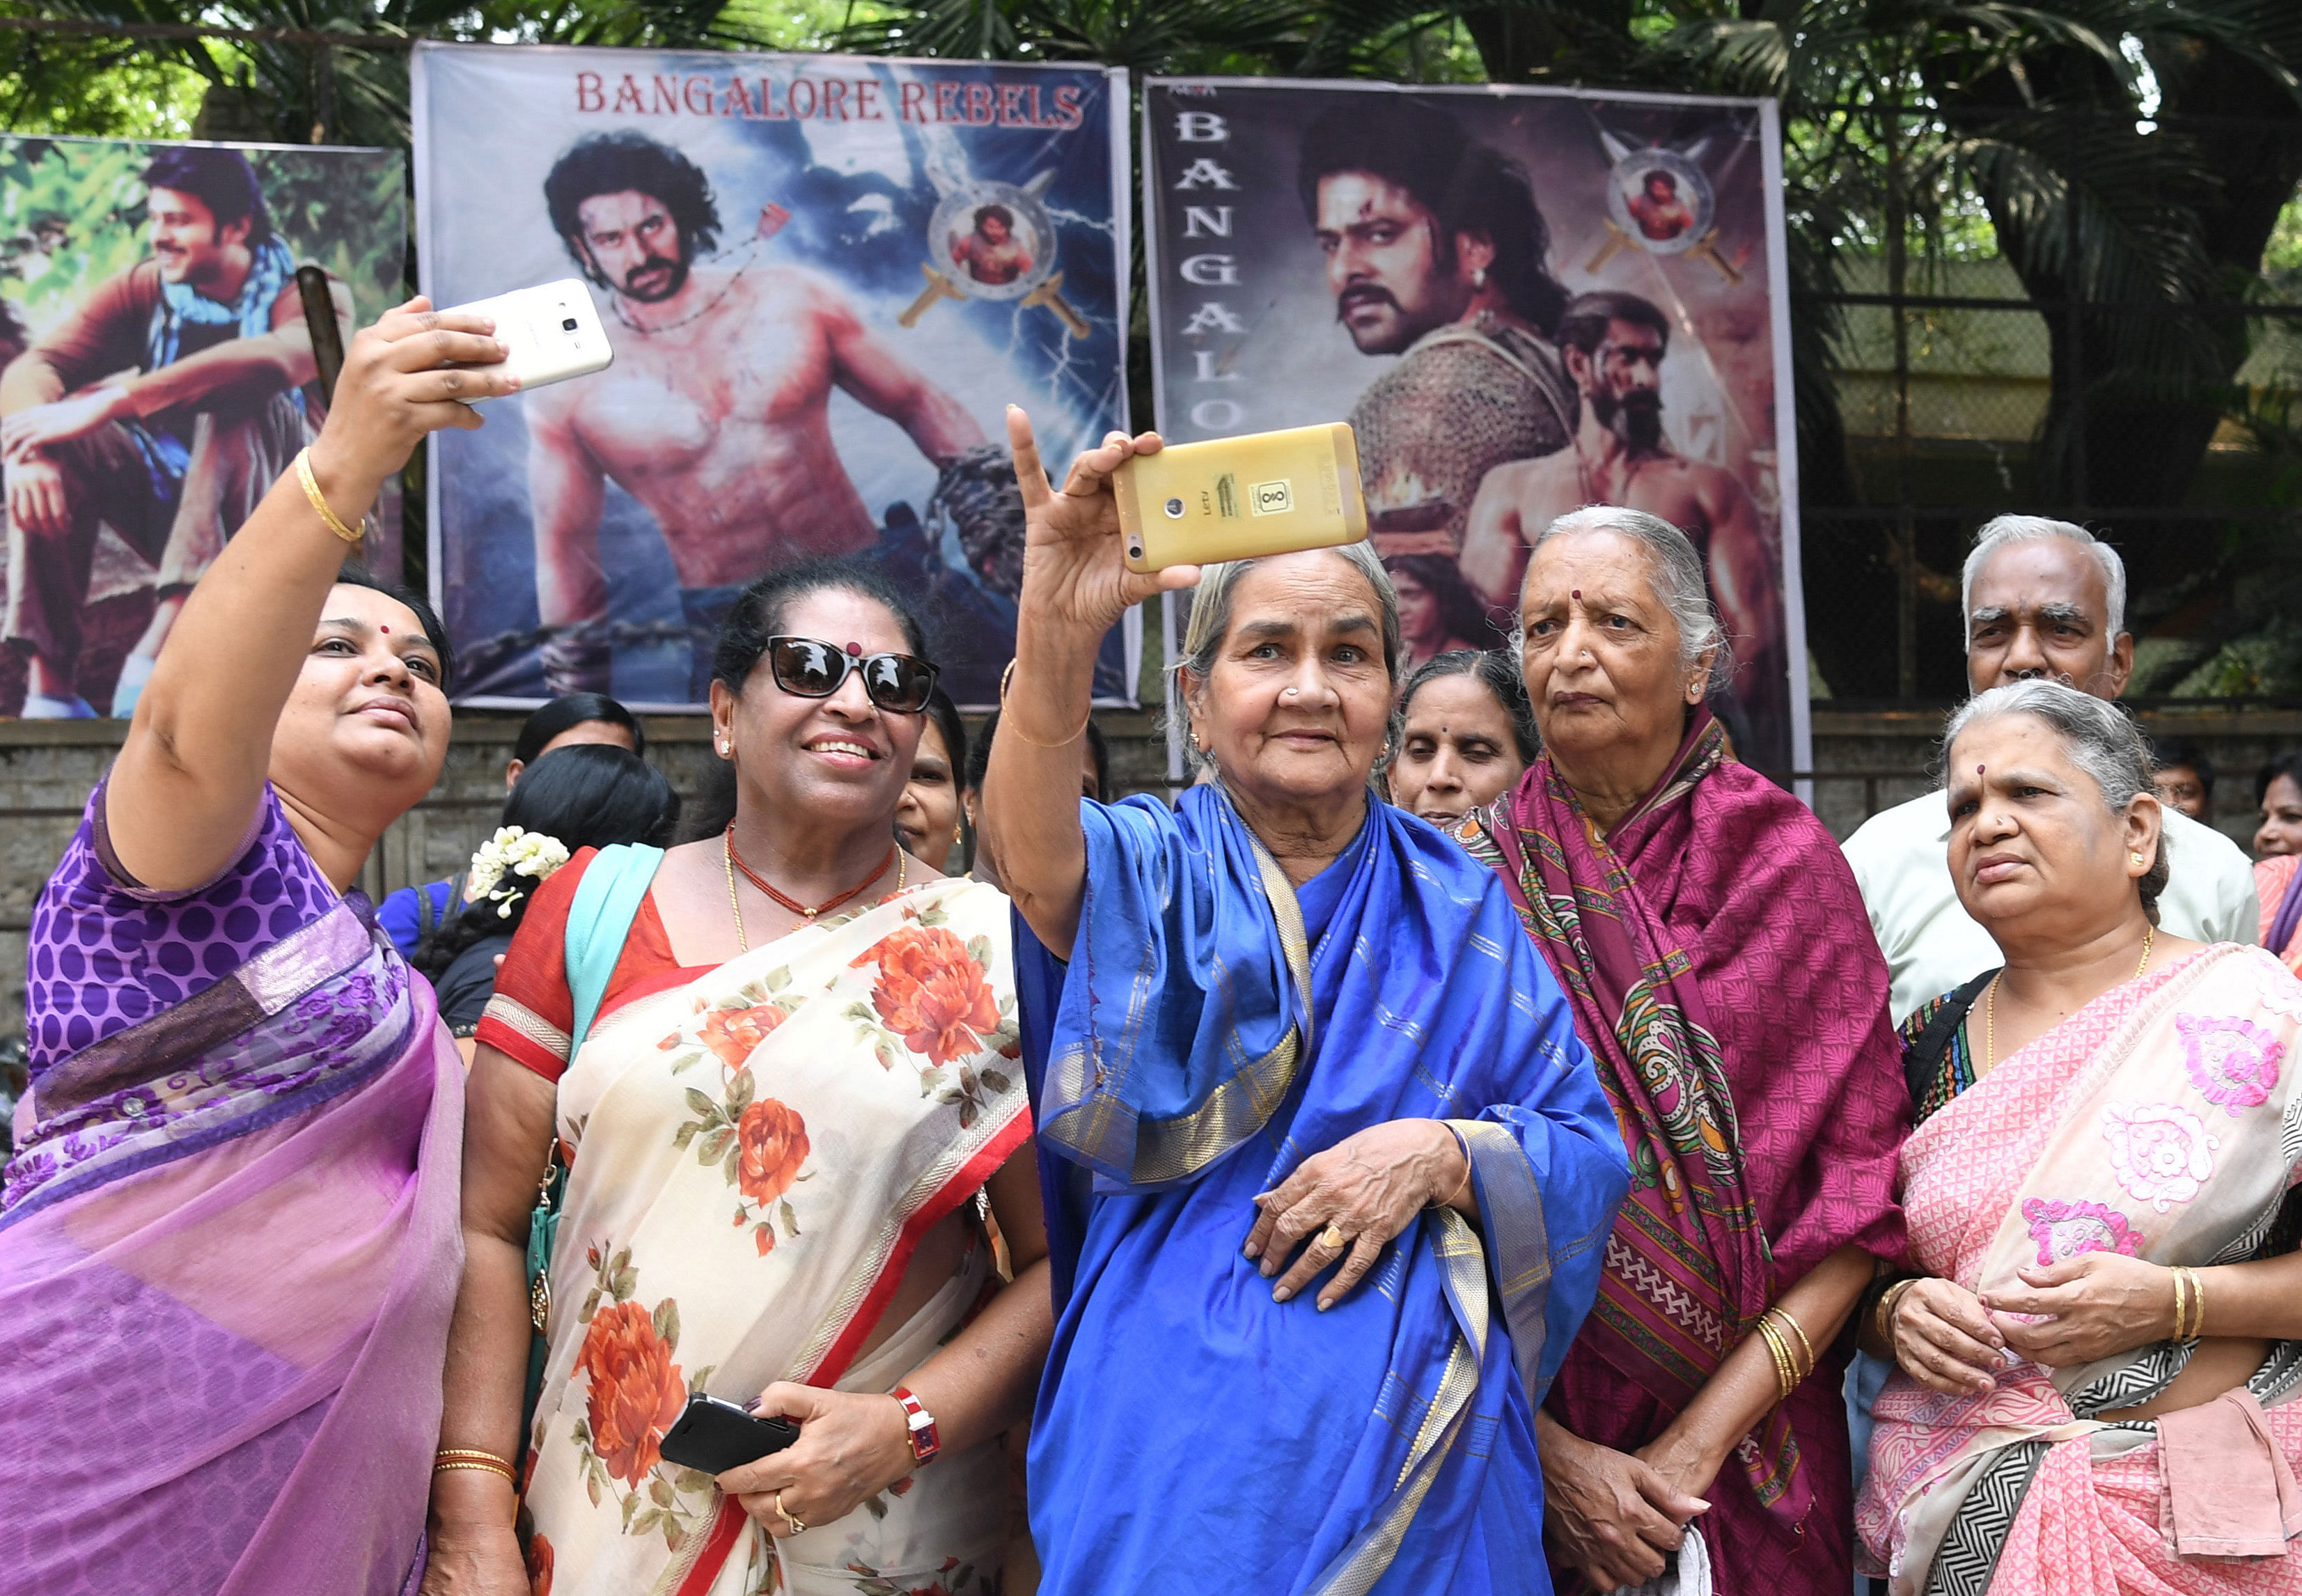 Elder movie enthusiasts snap selfies outside Cauvery theatre in Bengaluru before watching the opening show of Telugu movie Bahubali 2: The Conclusion on Friday. DH Photo by Kishor Kumar Bolar